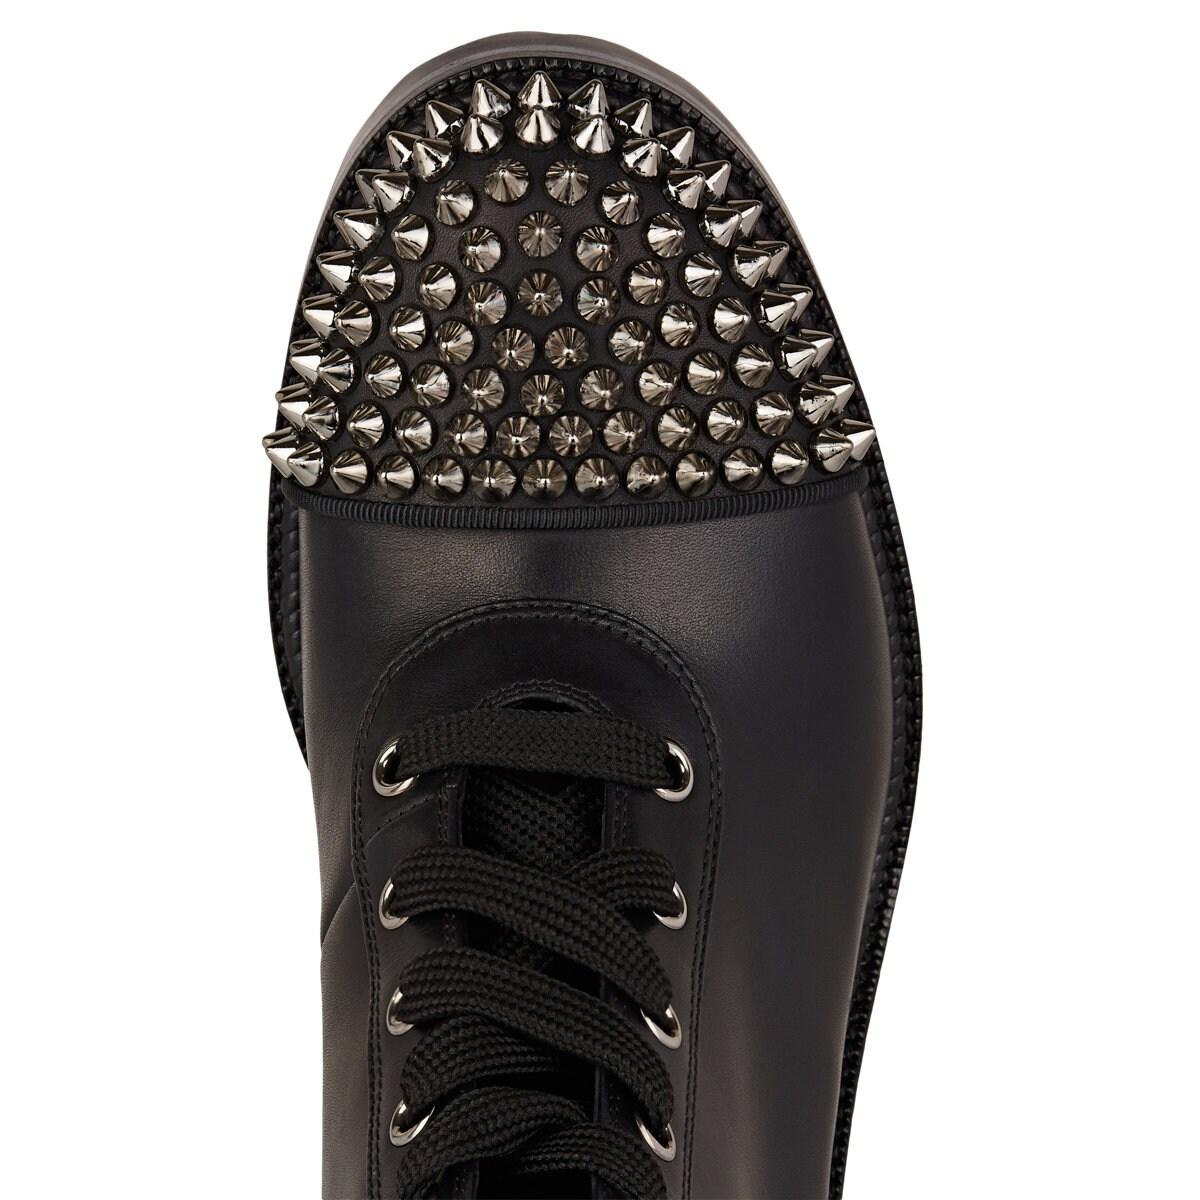 Christian Louboutin Studded Cap-toe Leather Ankle Boots in Black - Lyst